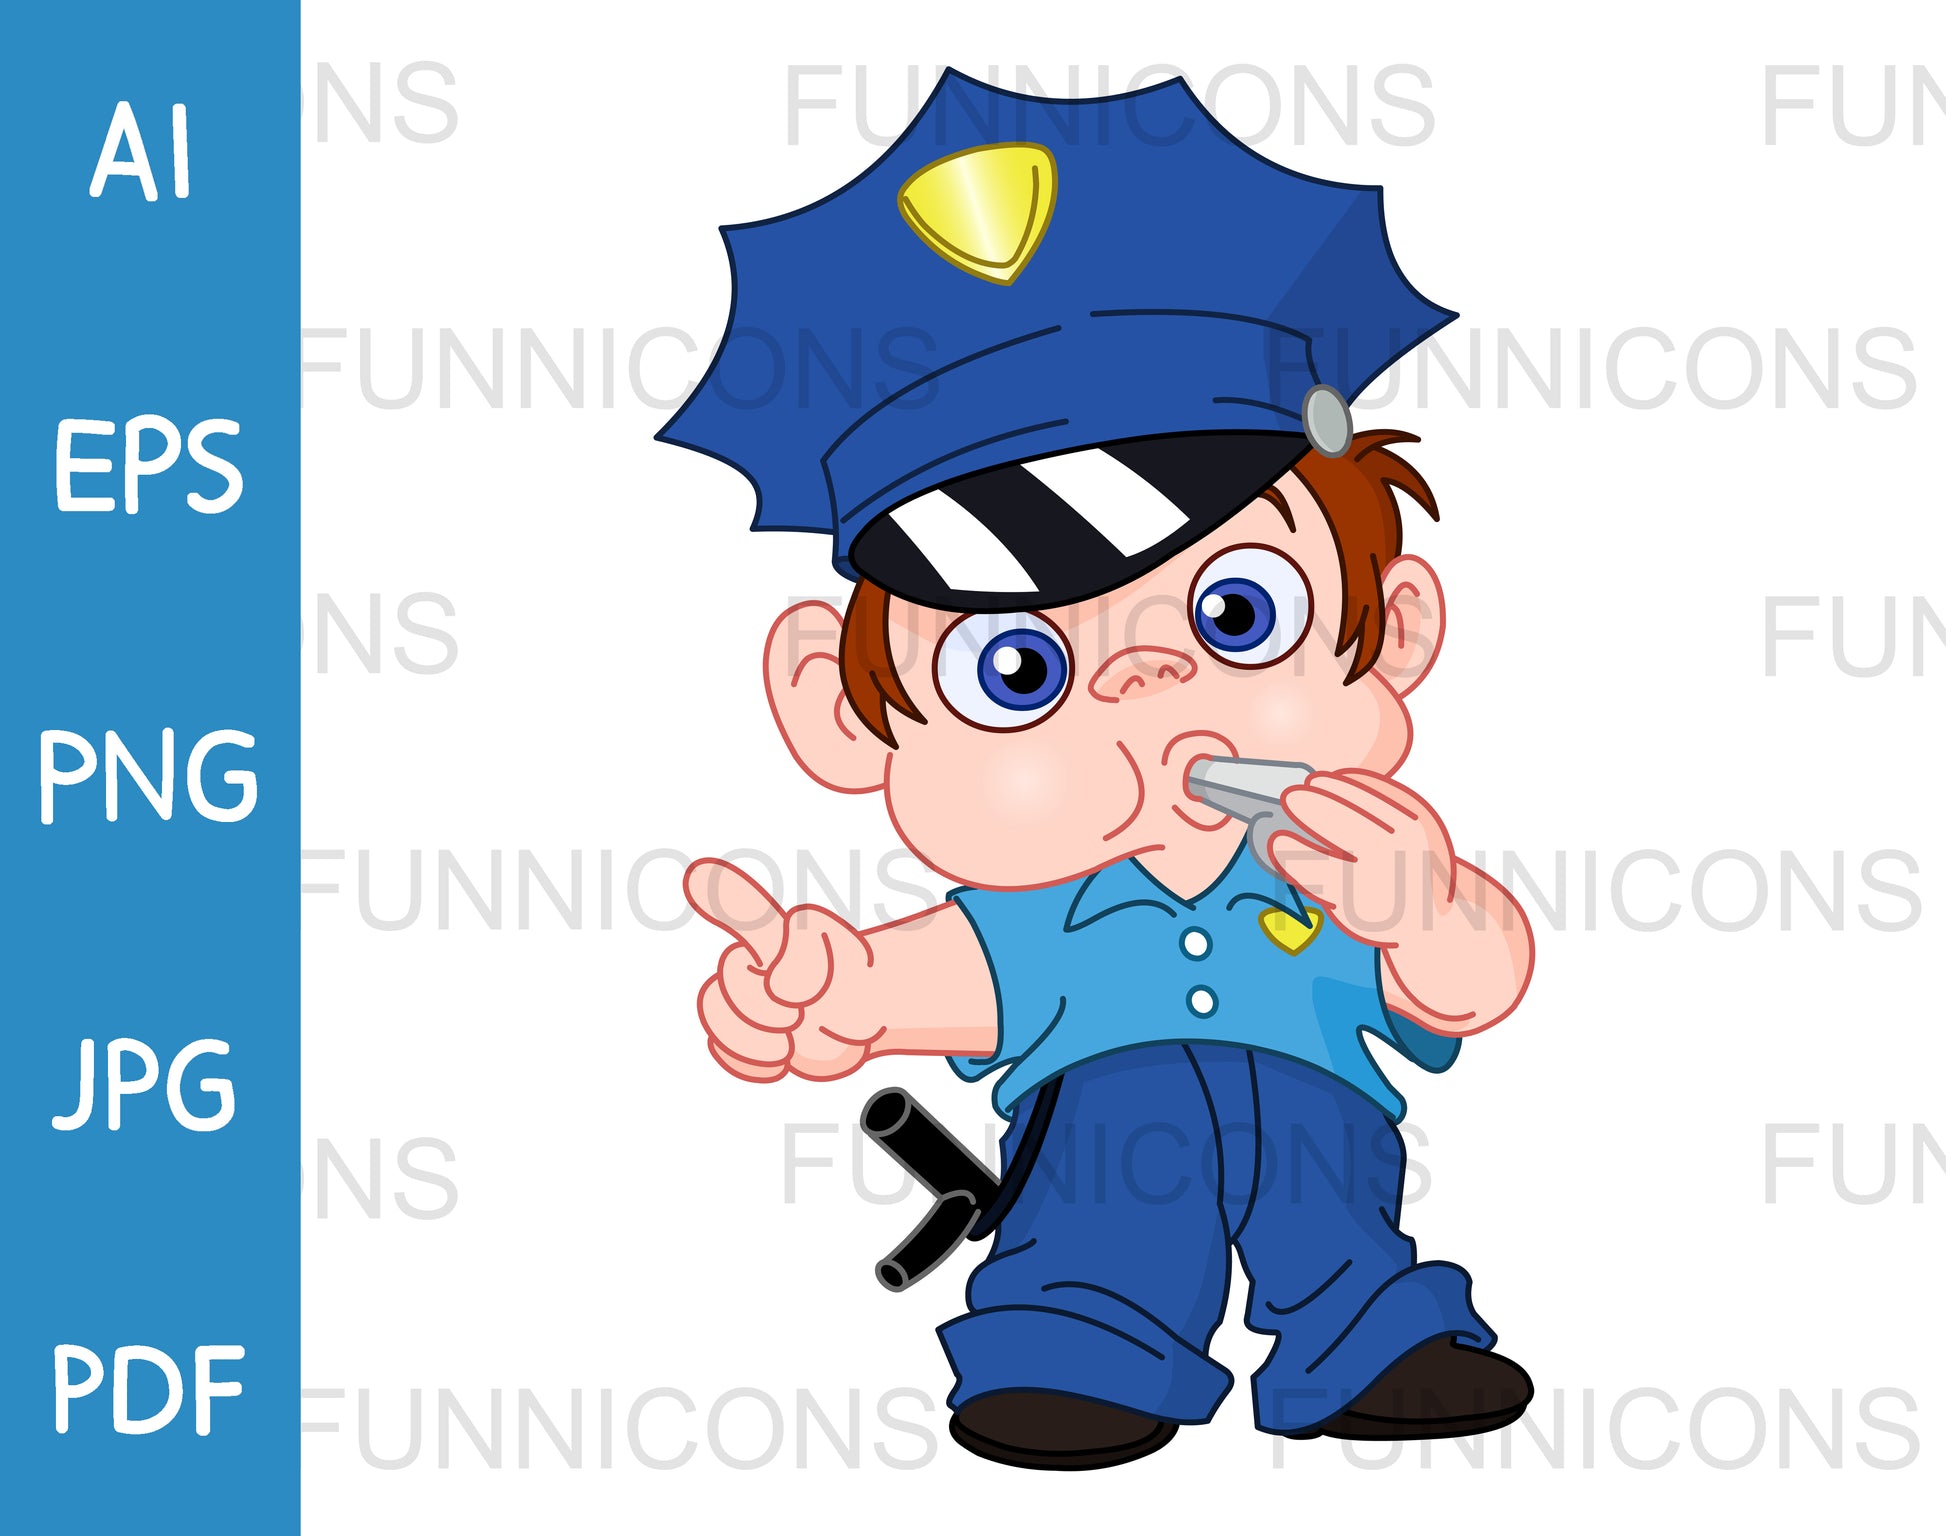 blowing whistle clipart